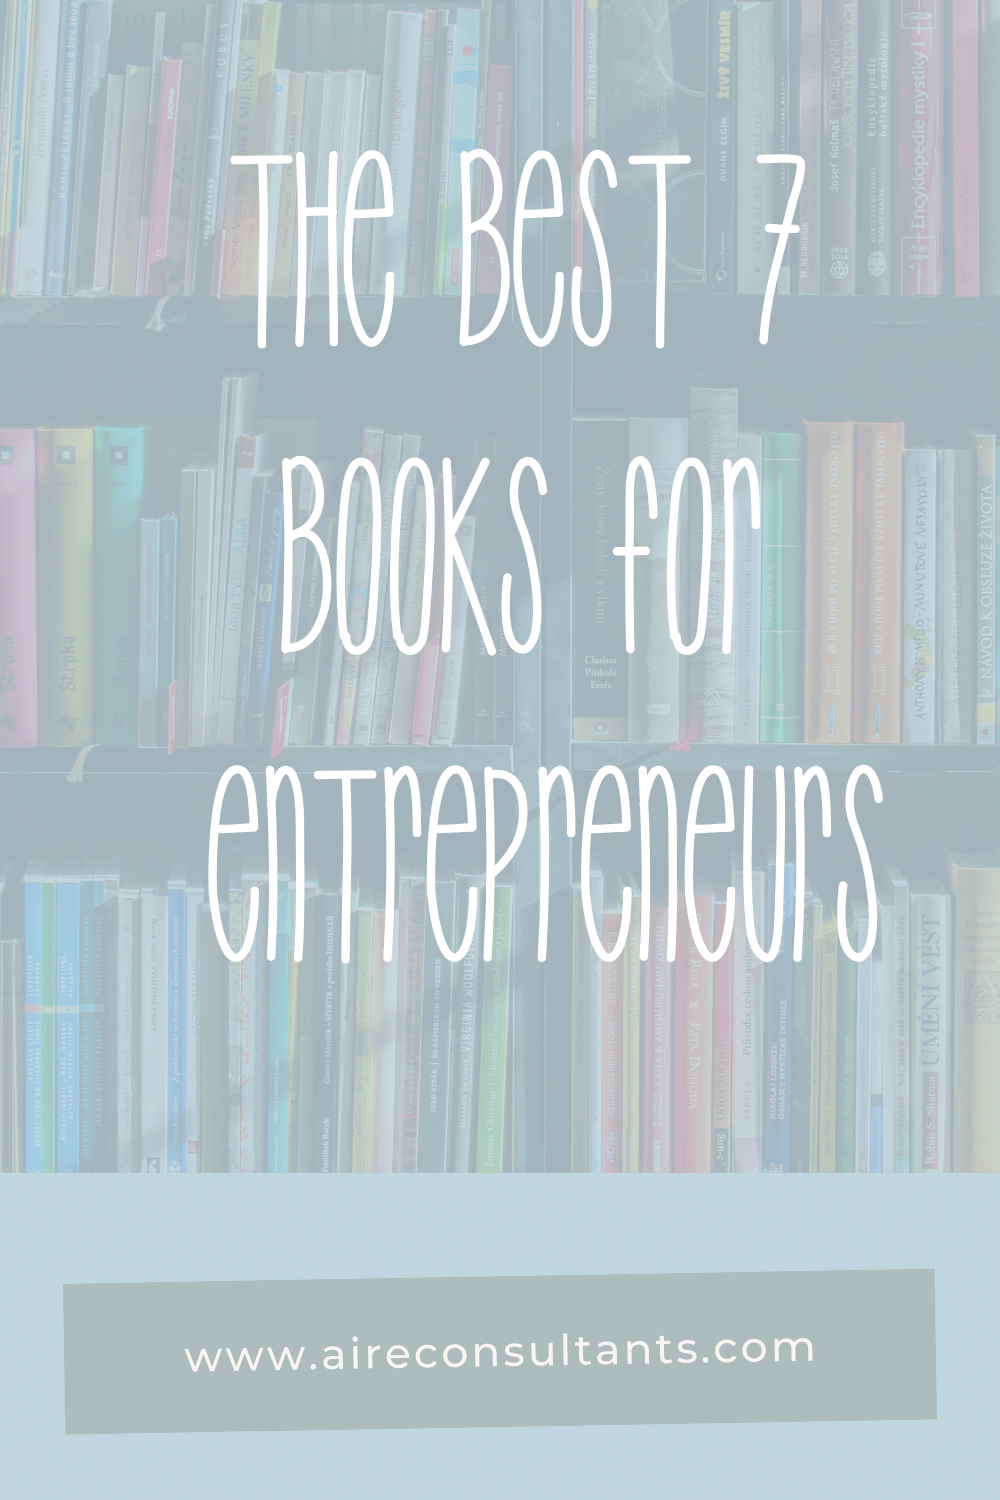 7 Best Books for Entrepreneurs to Start a Successful Business